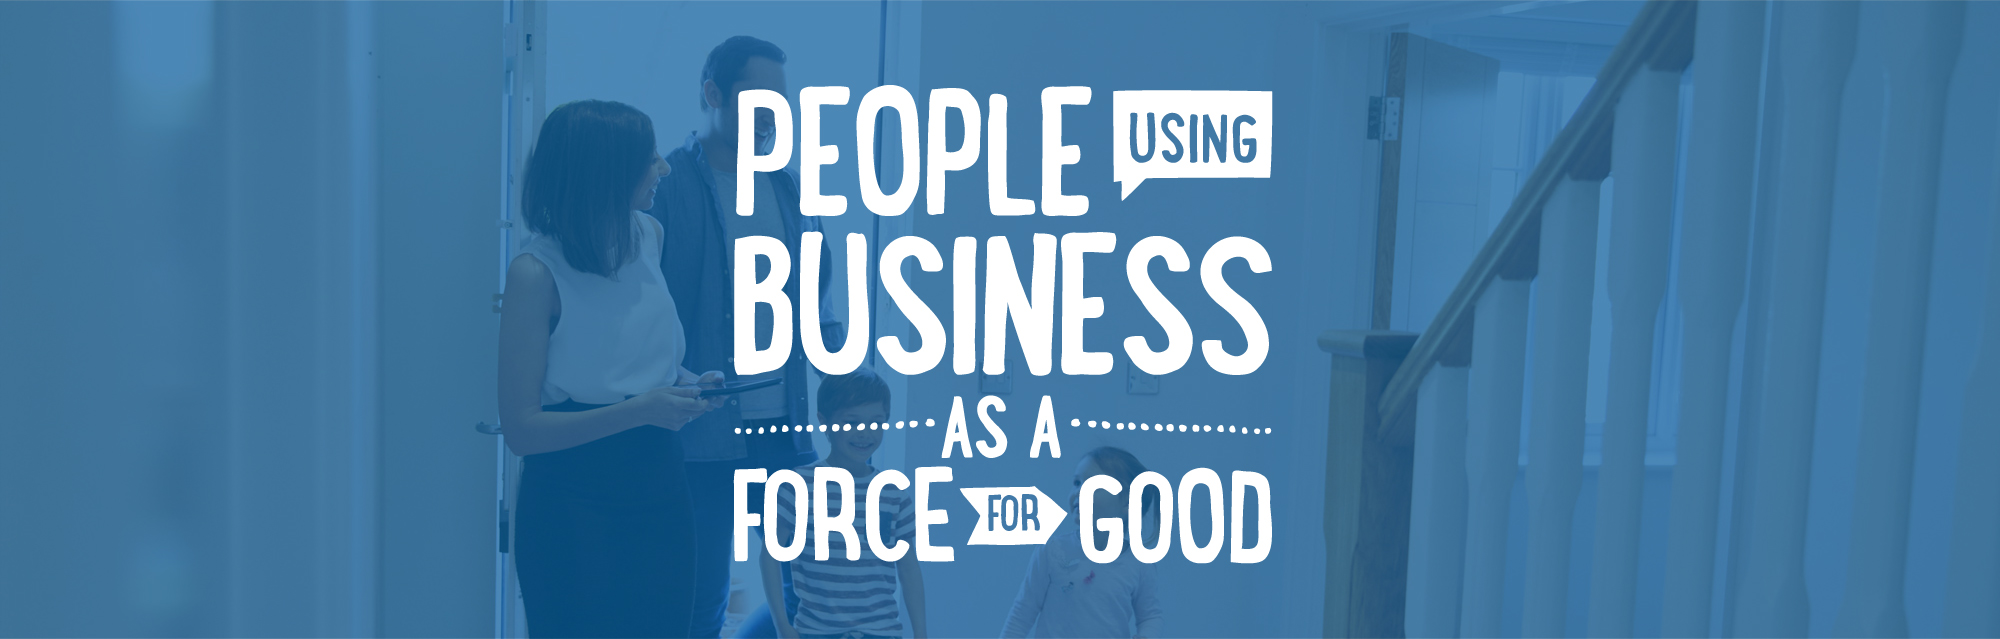 People using business as a force for good